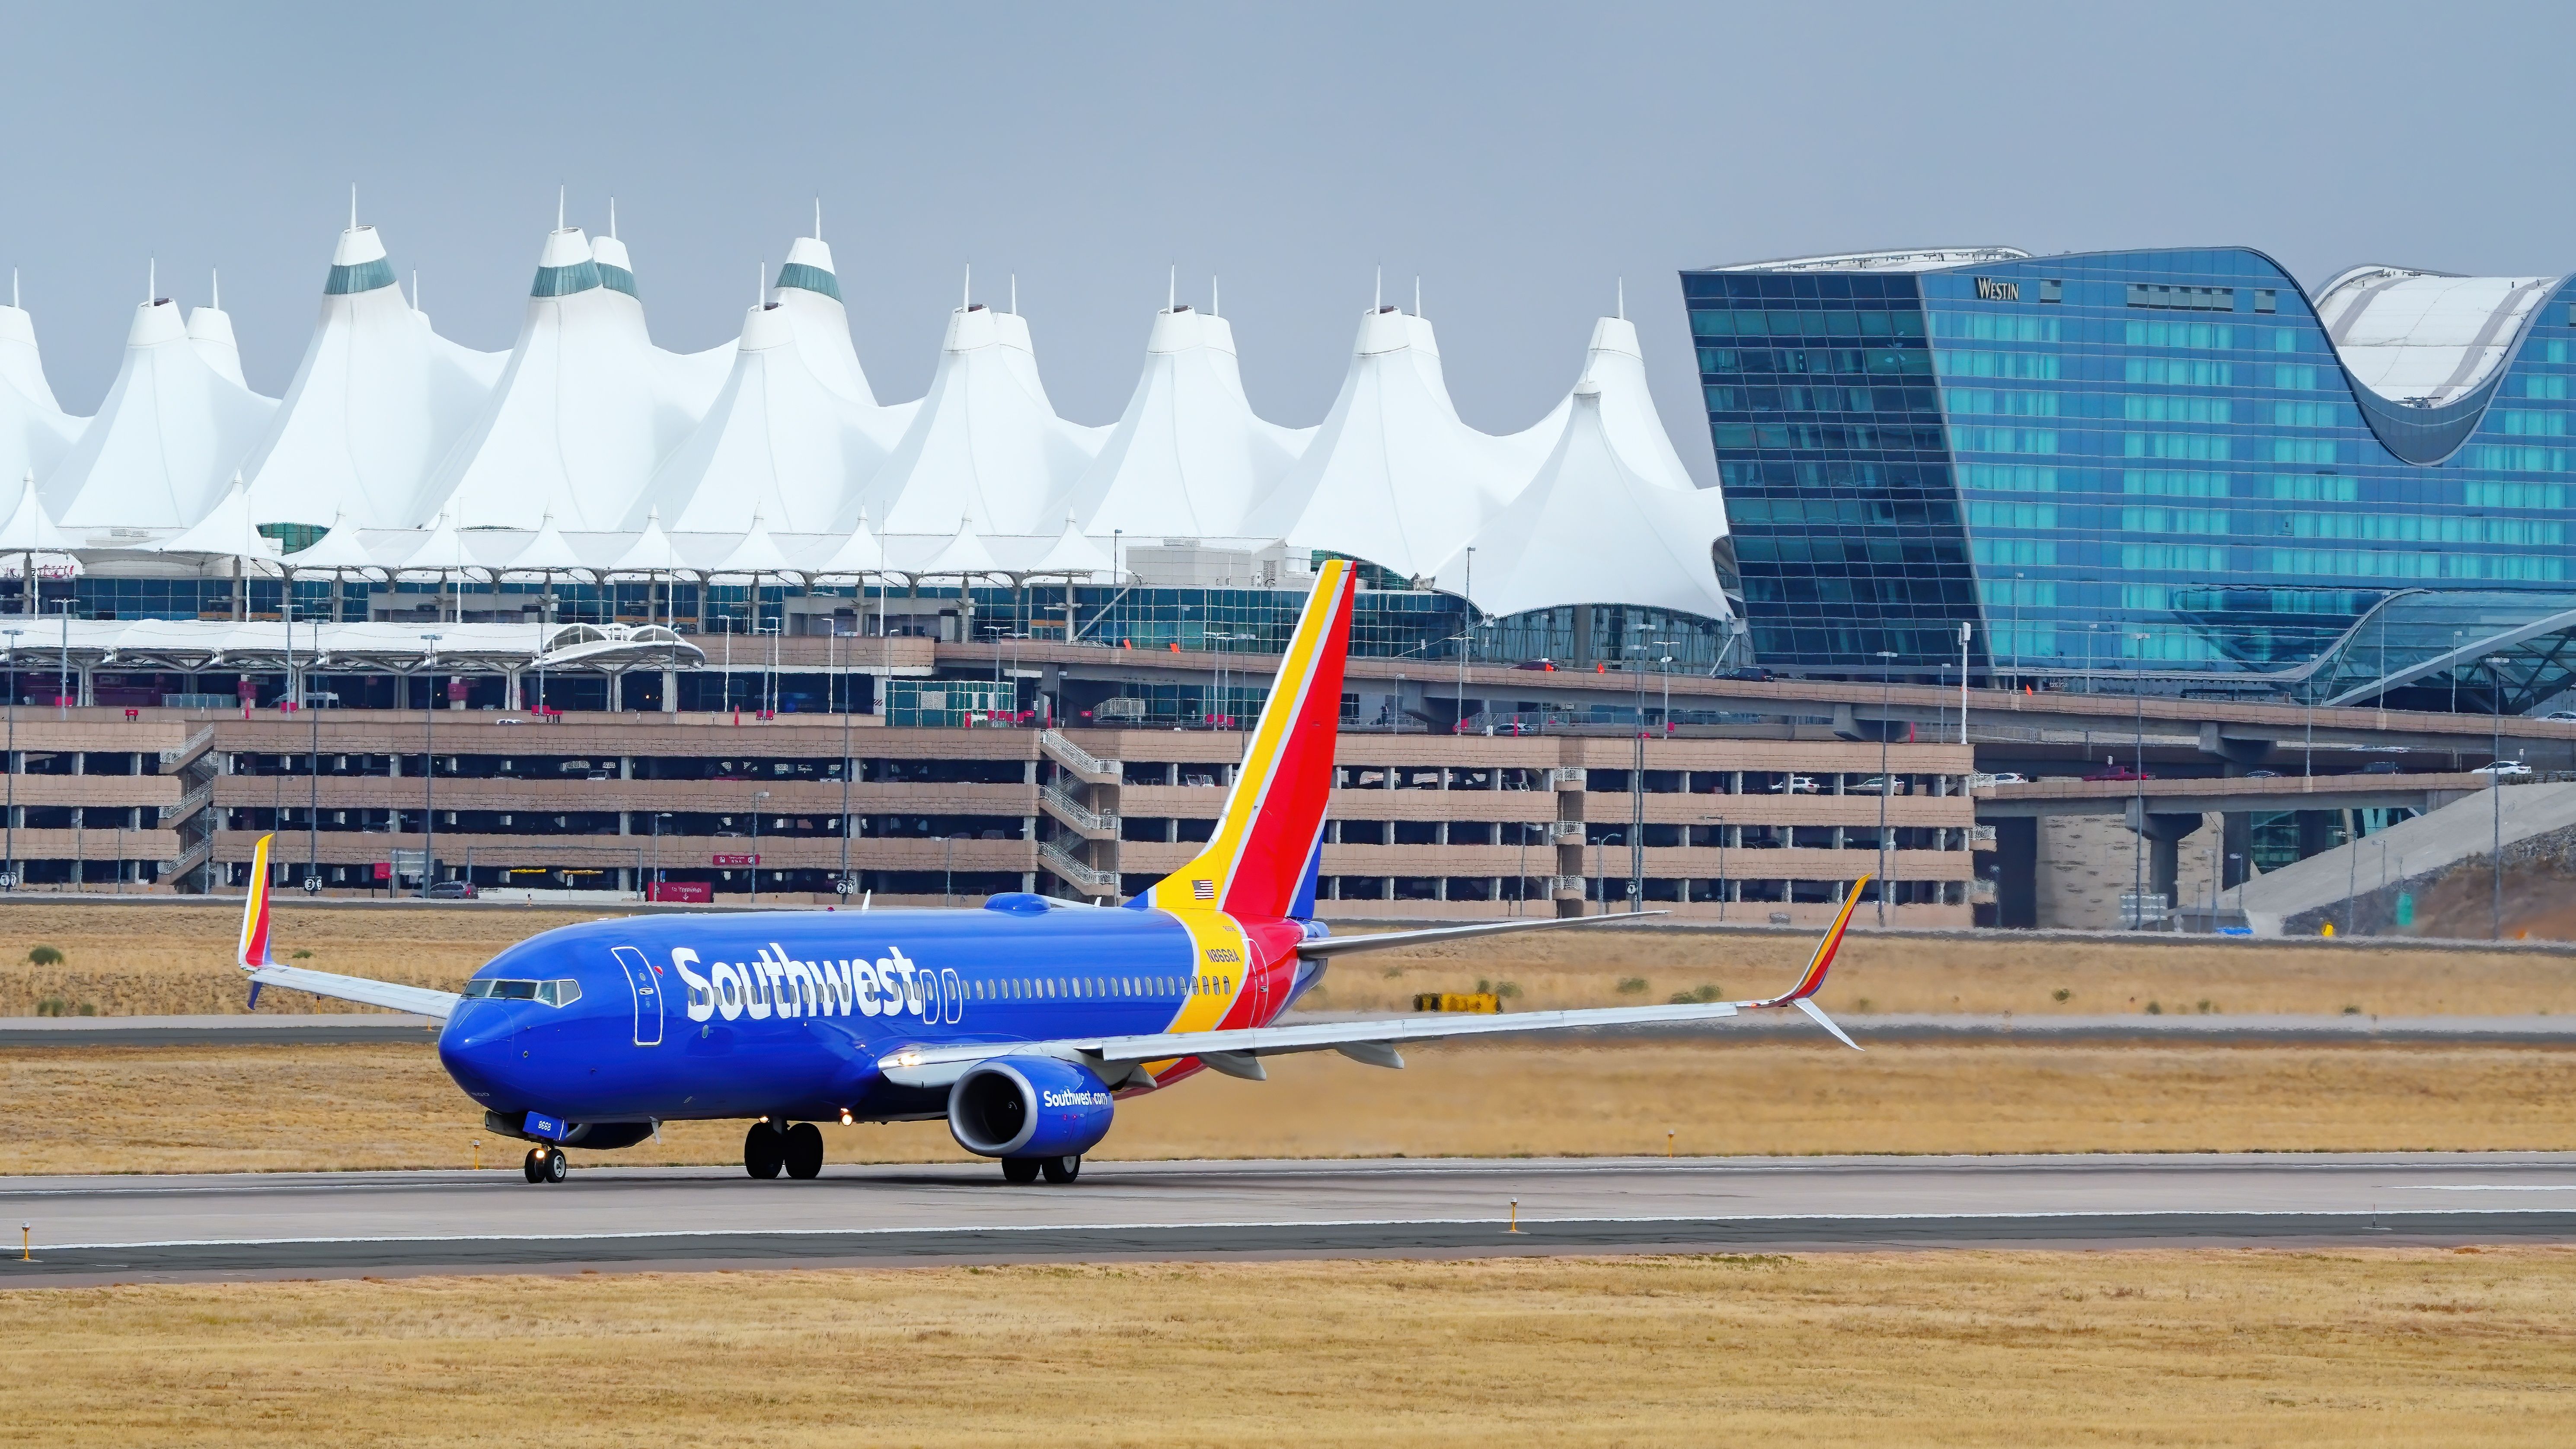 A Southwest Airlines aircraft on the apron at Denver International Airport.